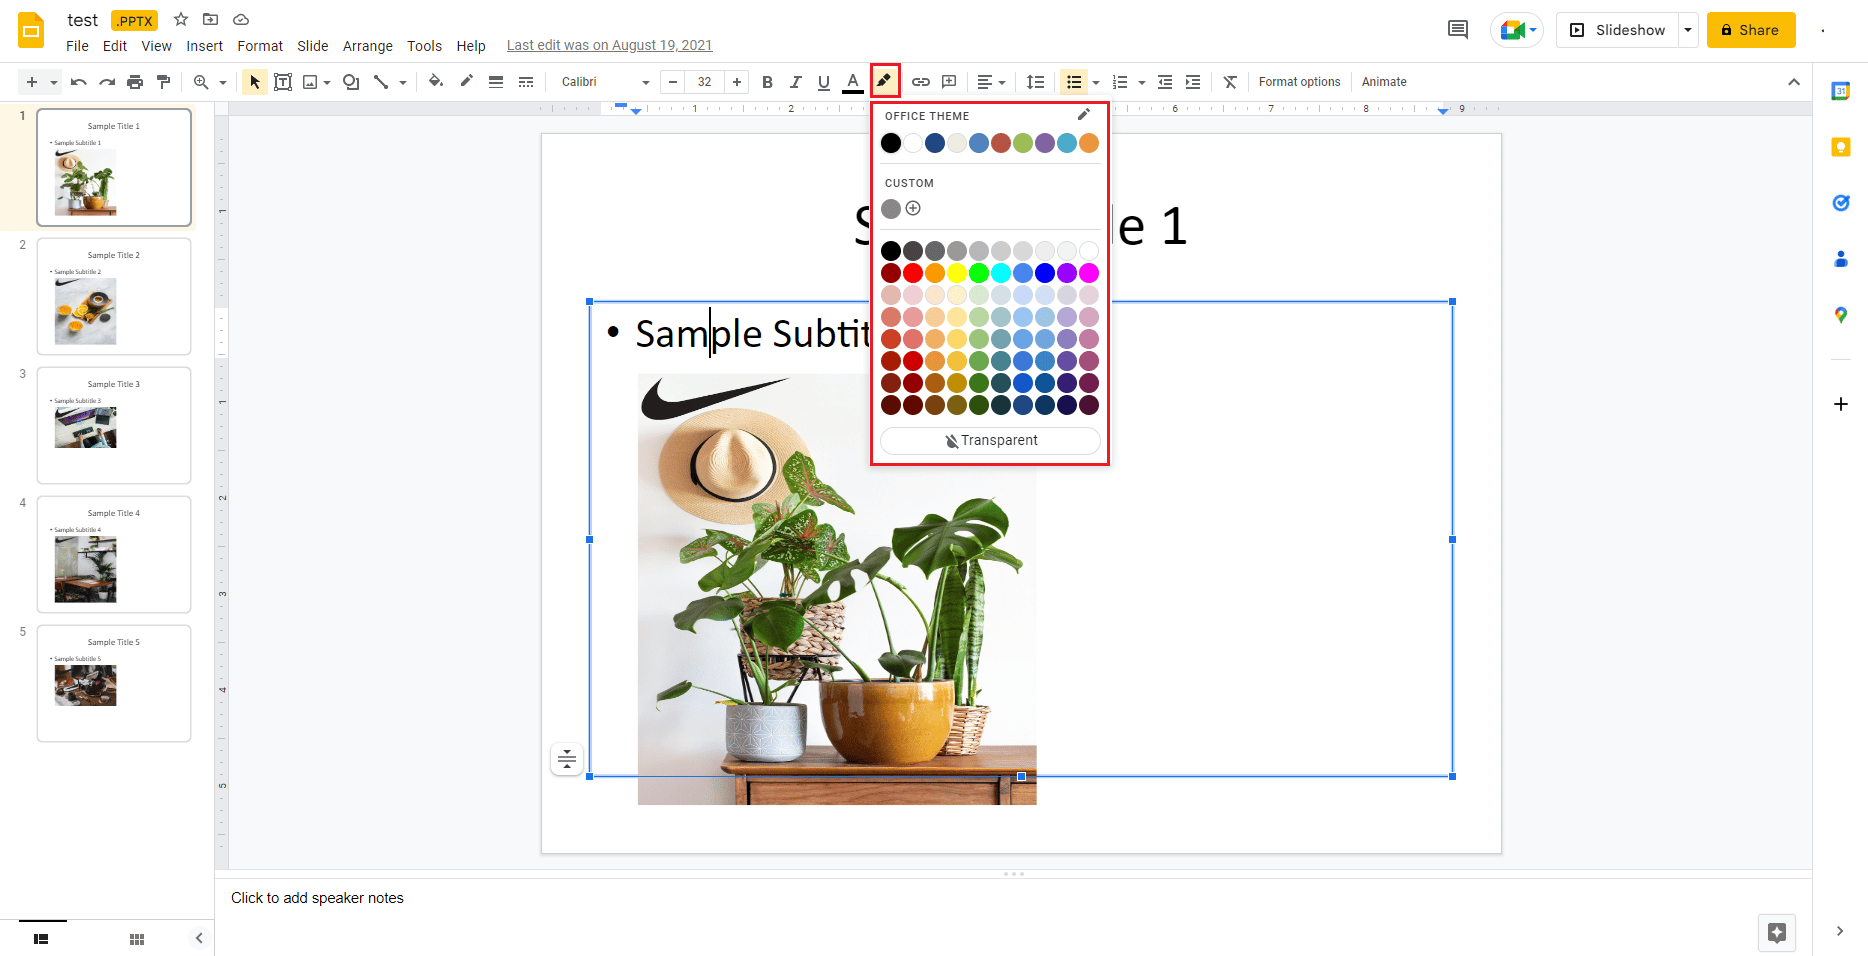 click on pencil icon and choose a colour to highlight text